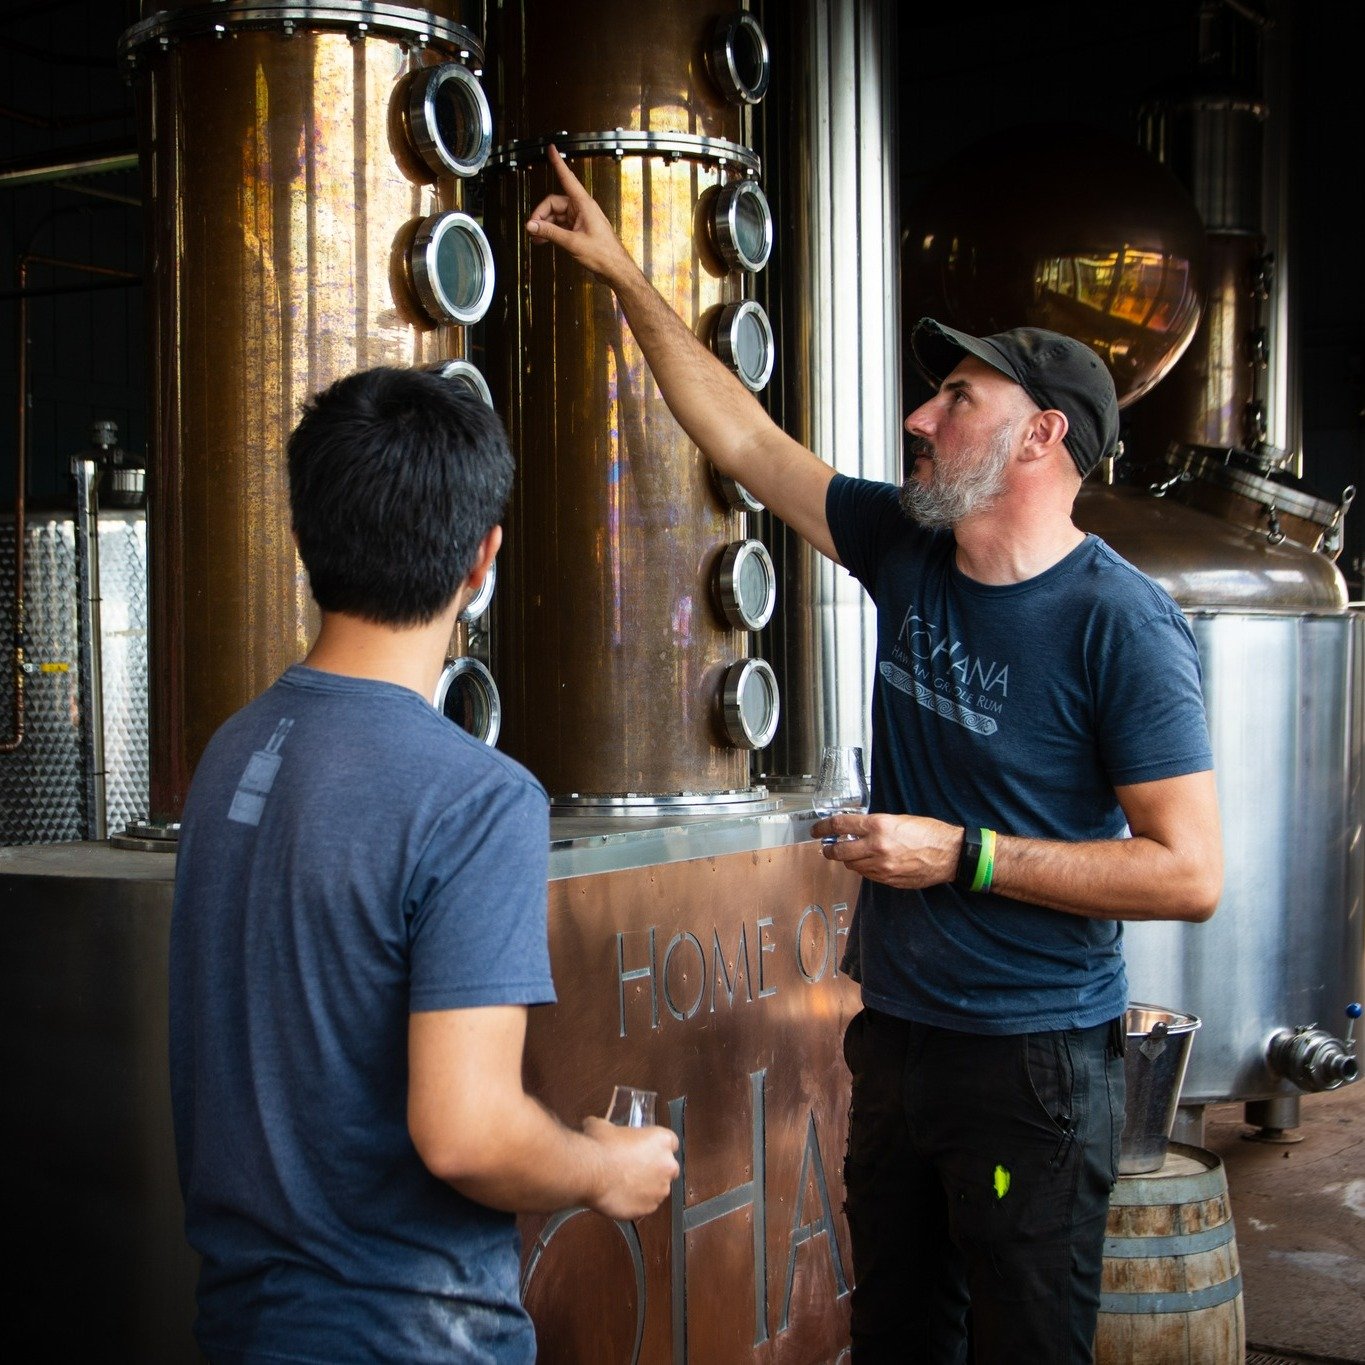 Curious about what goes on behind the scenes at a distillery? 🥃 Take a peek into our world at Kō Hana Distillers, where Hawaiian tradition meets modern craft. From selecting the finest local ingredients to the detailed art of fermentation and distil